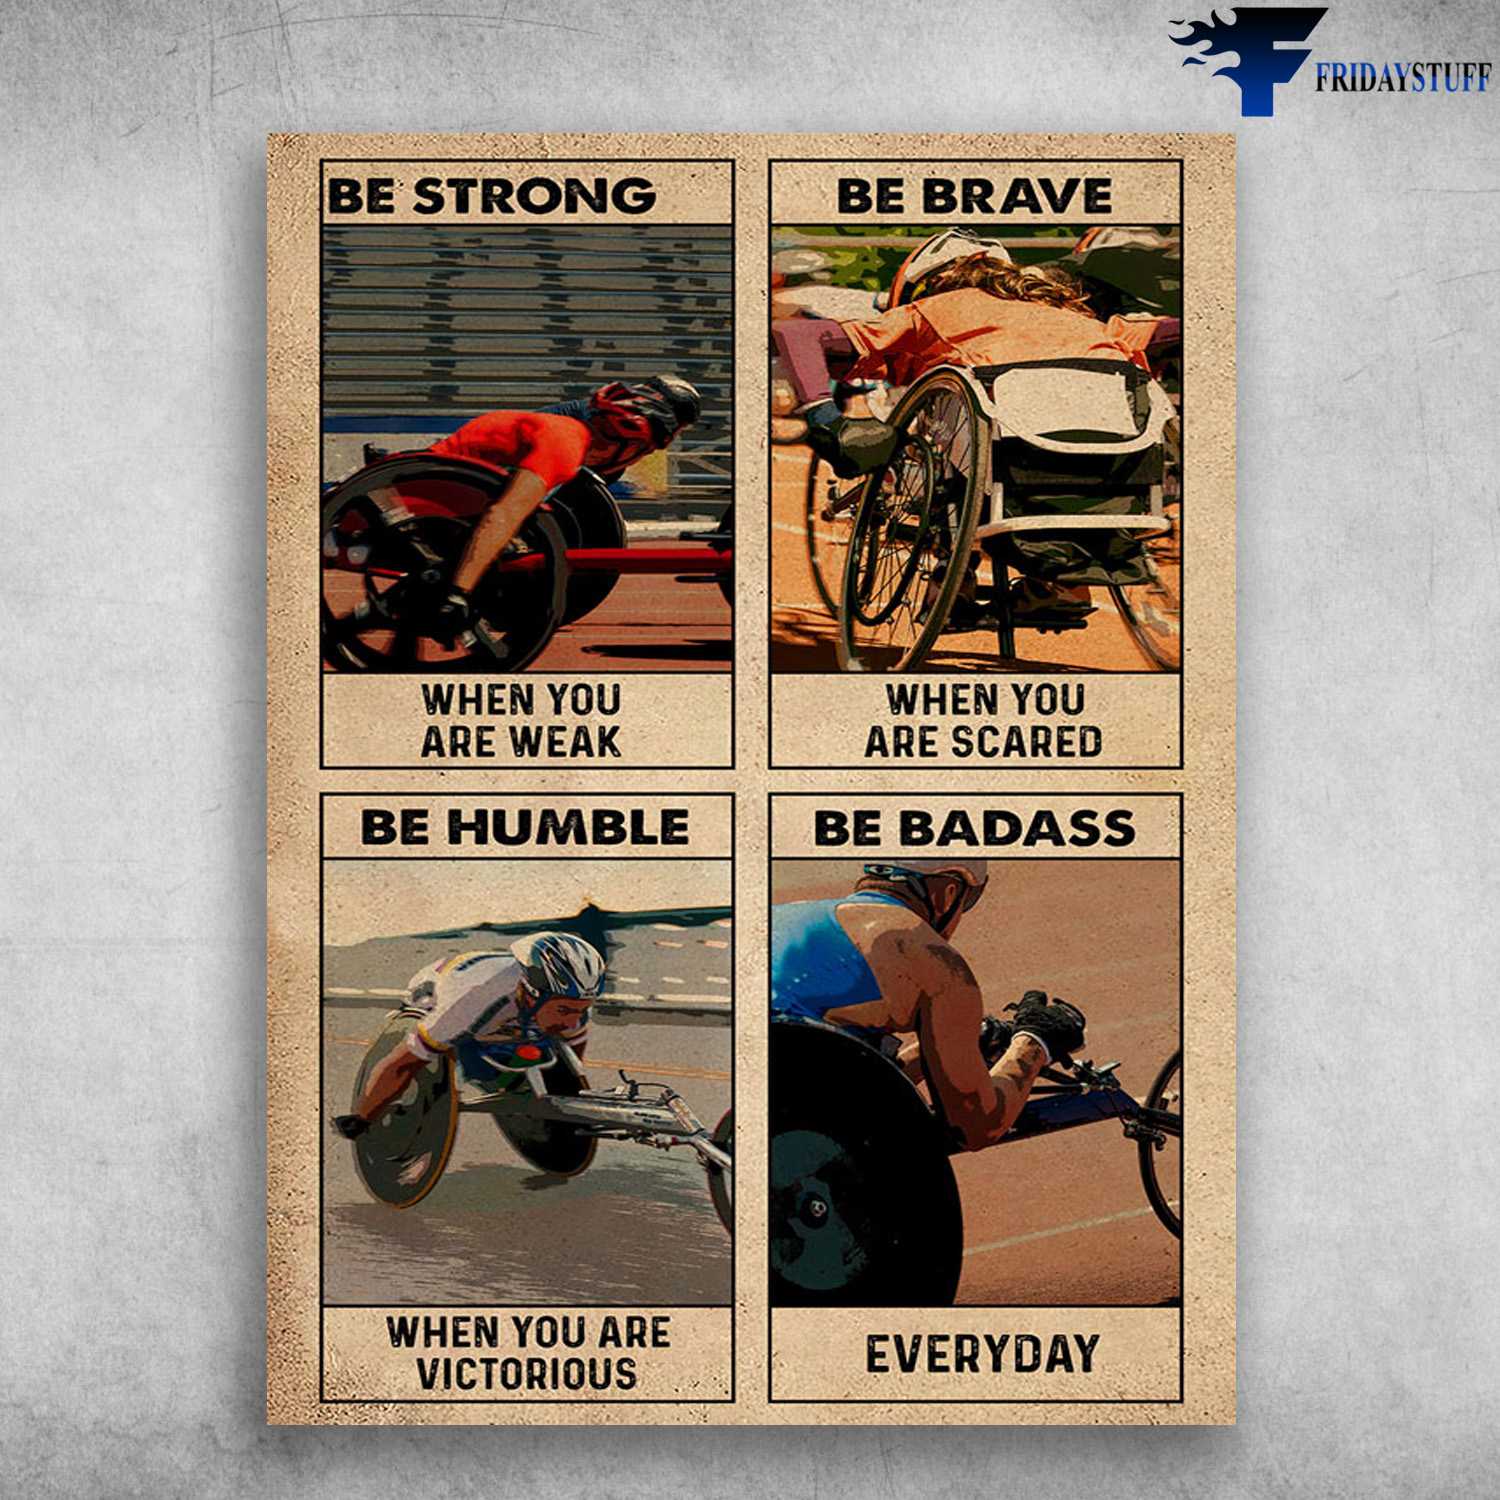 Sports For The Disabled, Disability Sports - Be Strong When You Are Weak, Be Brave When You Are Scared, Be Humble When You Are Victorious, Be Badass Everyday